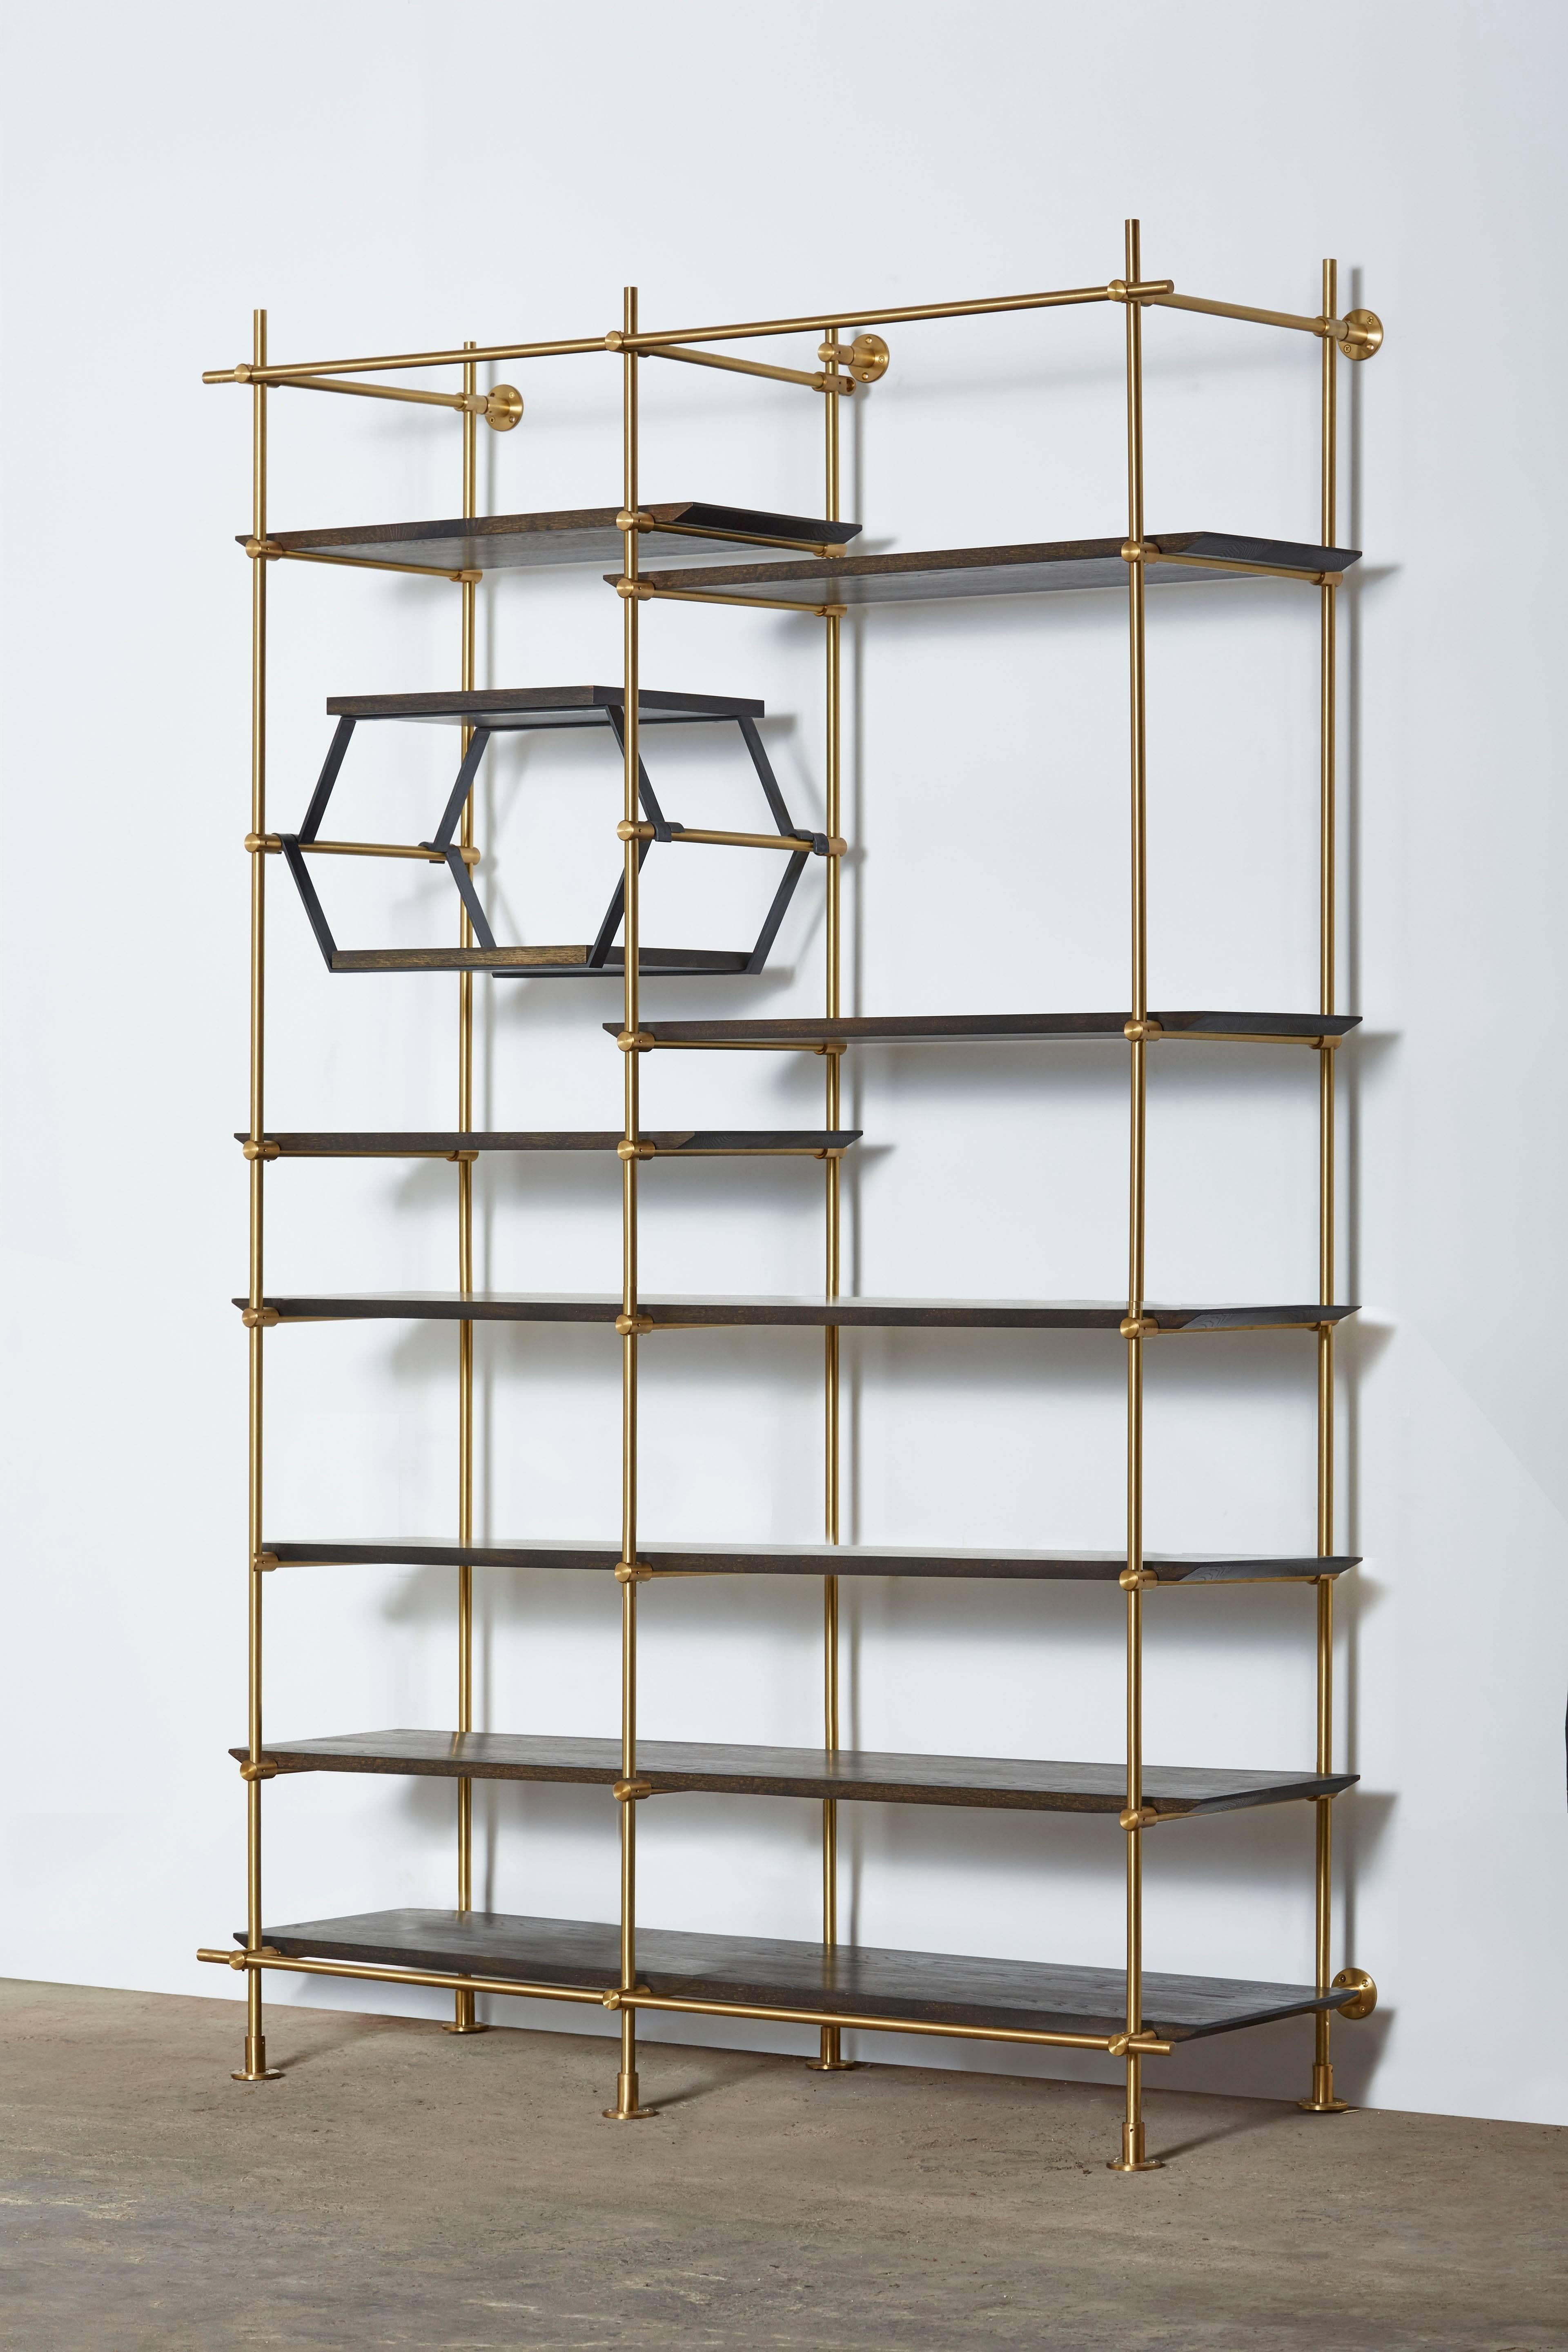 This two-bay version of Amuneal’s collector’s shelving unit features solid machined brass fittings and posts in a warm brass finish. The unit mounts to the floor and to the wall to support a series of easily adjustable shelves. The wood shelves are